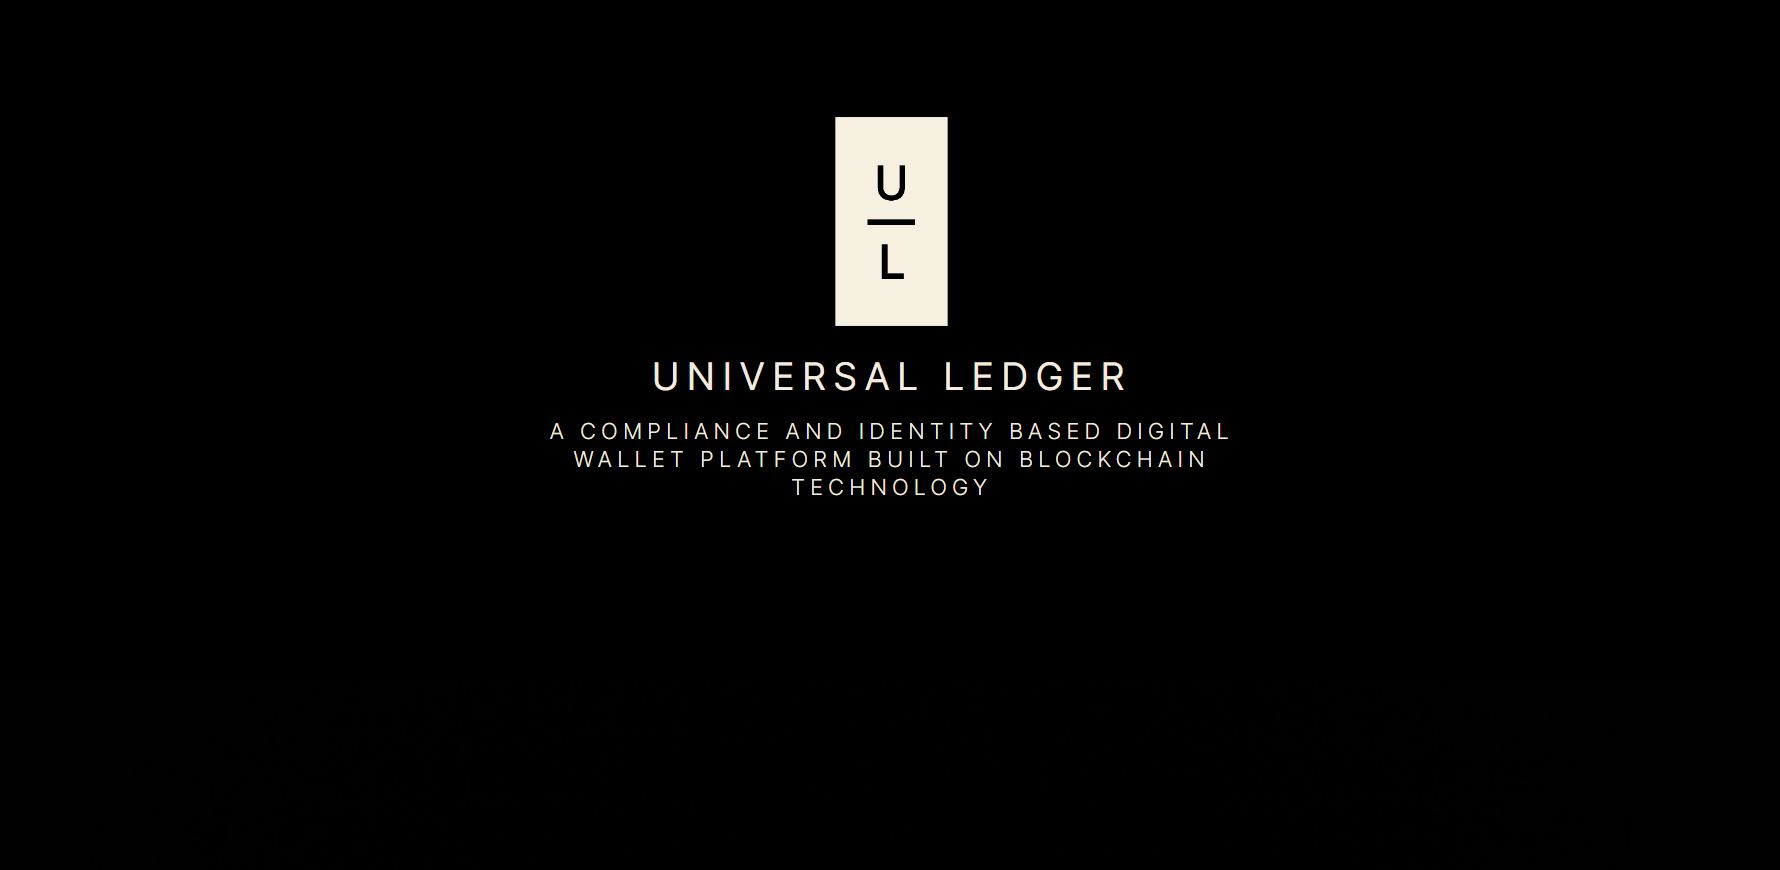 With $10 million in funding, Universal Ledger has created a blockchain-enabled network that prioritizes identity and compliance